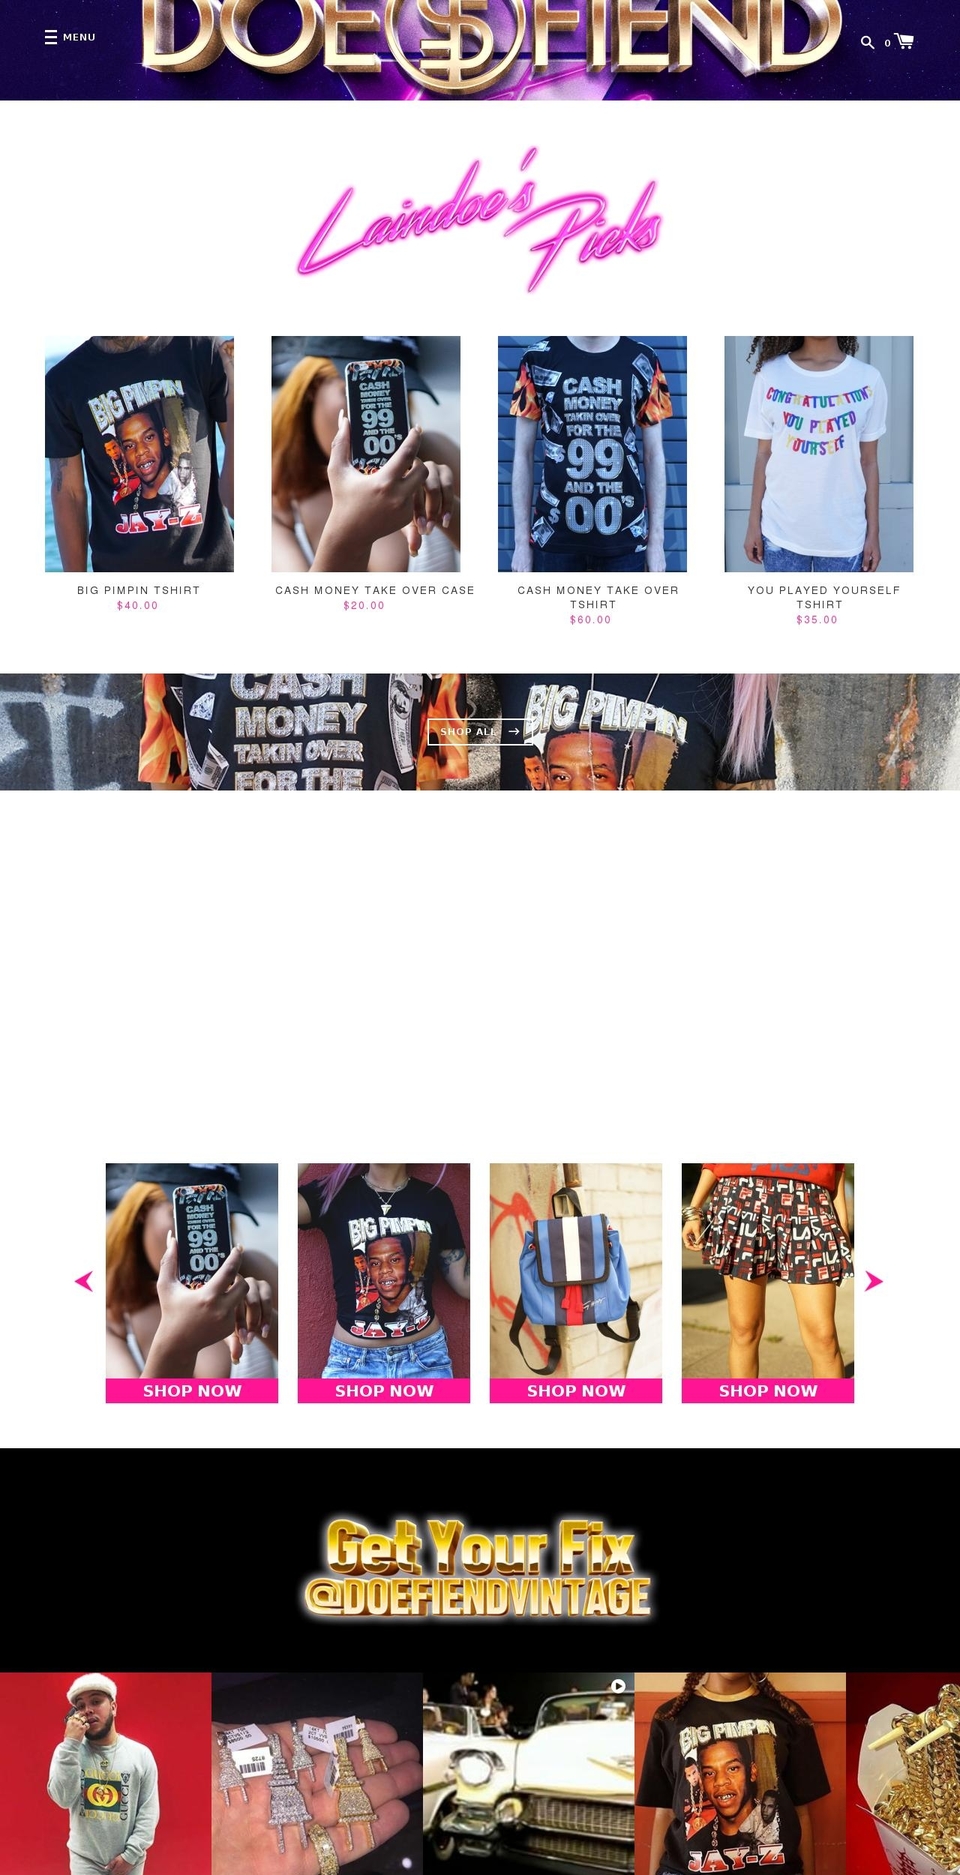 Label Shopify theme site example doefiend.com